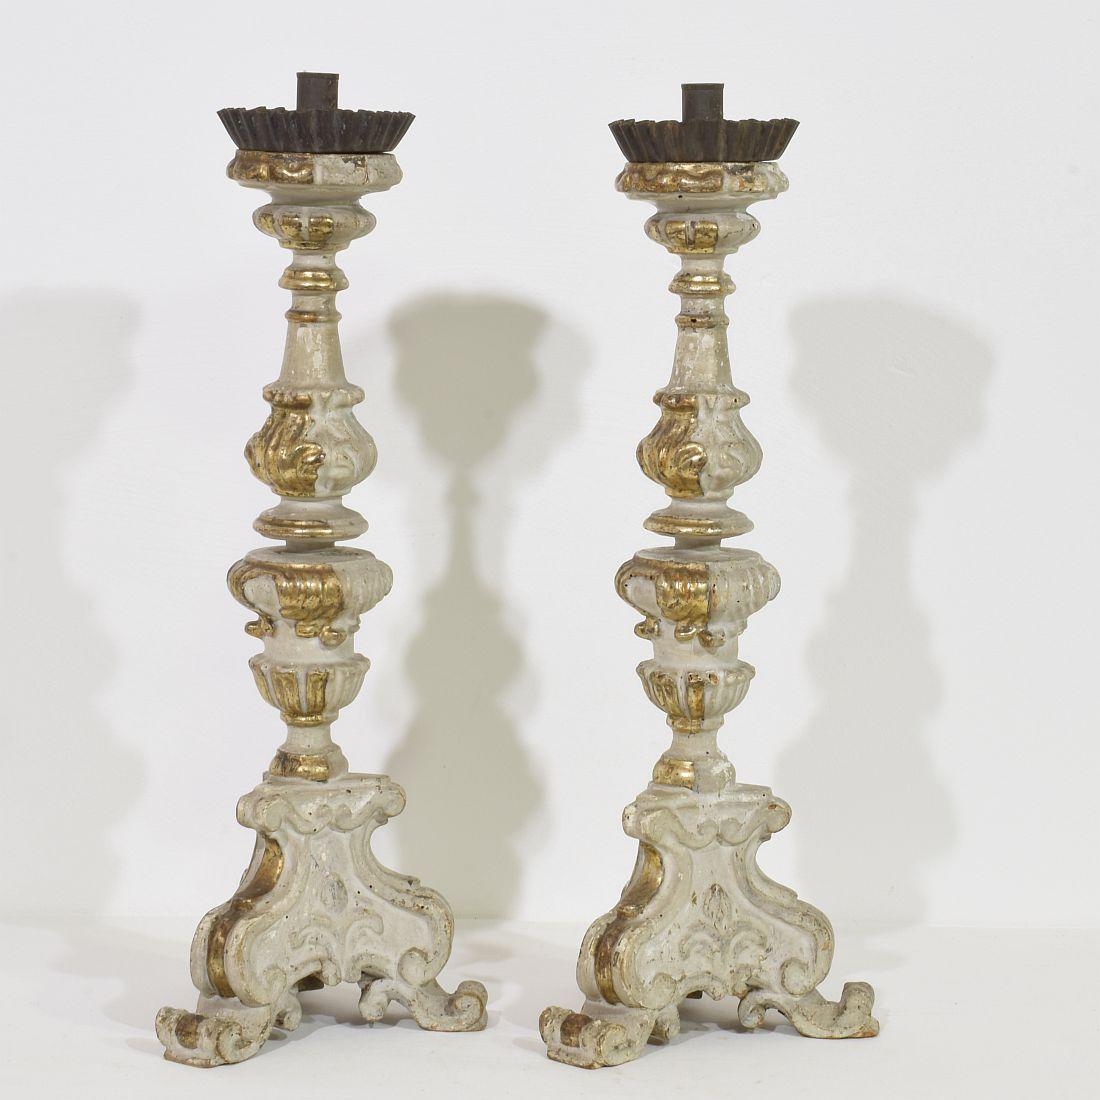 Pair of 18th Century Italian Carved Wooden Baroque Candleholders For Sale 2